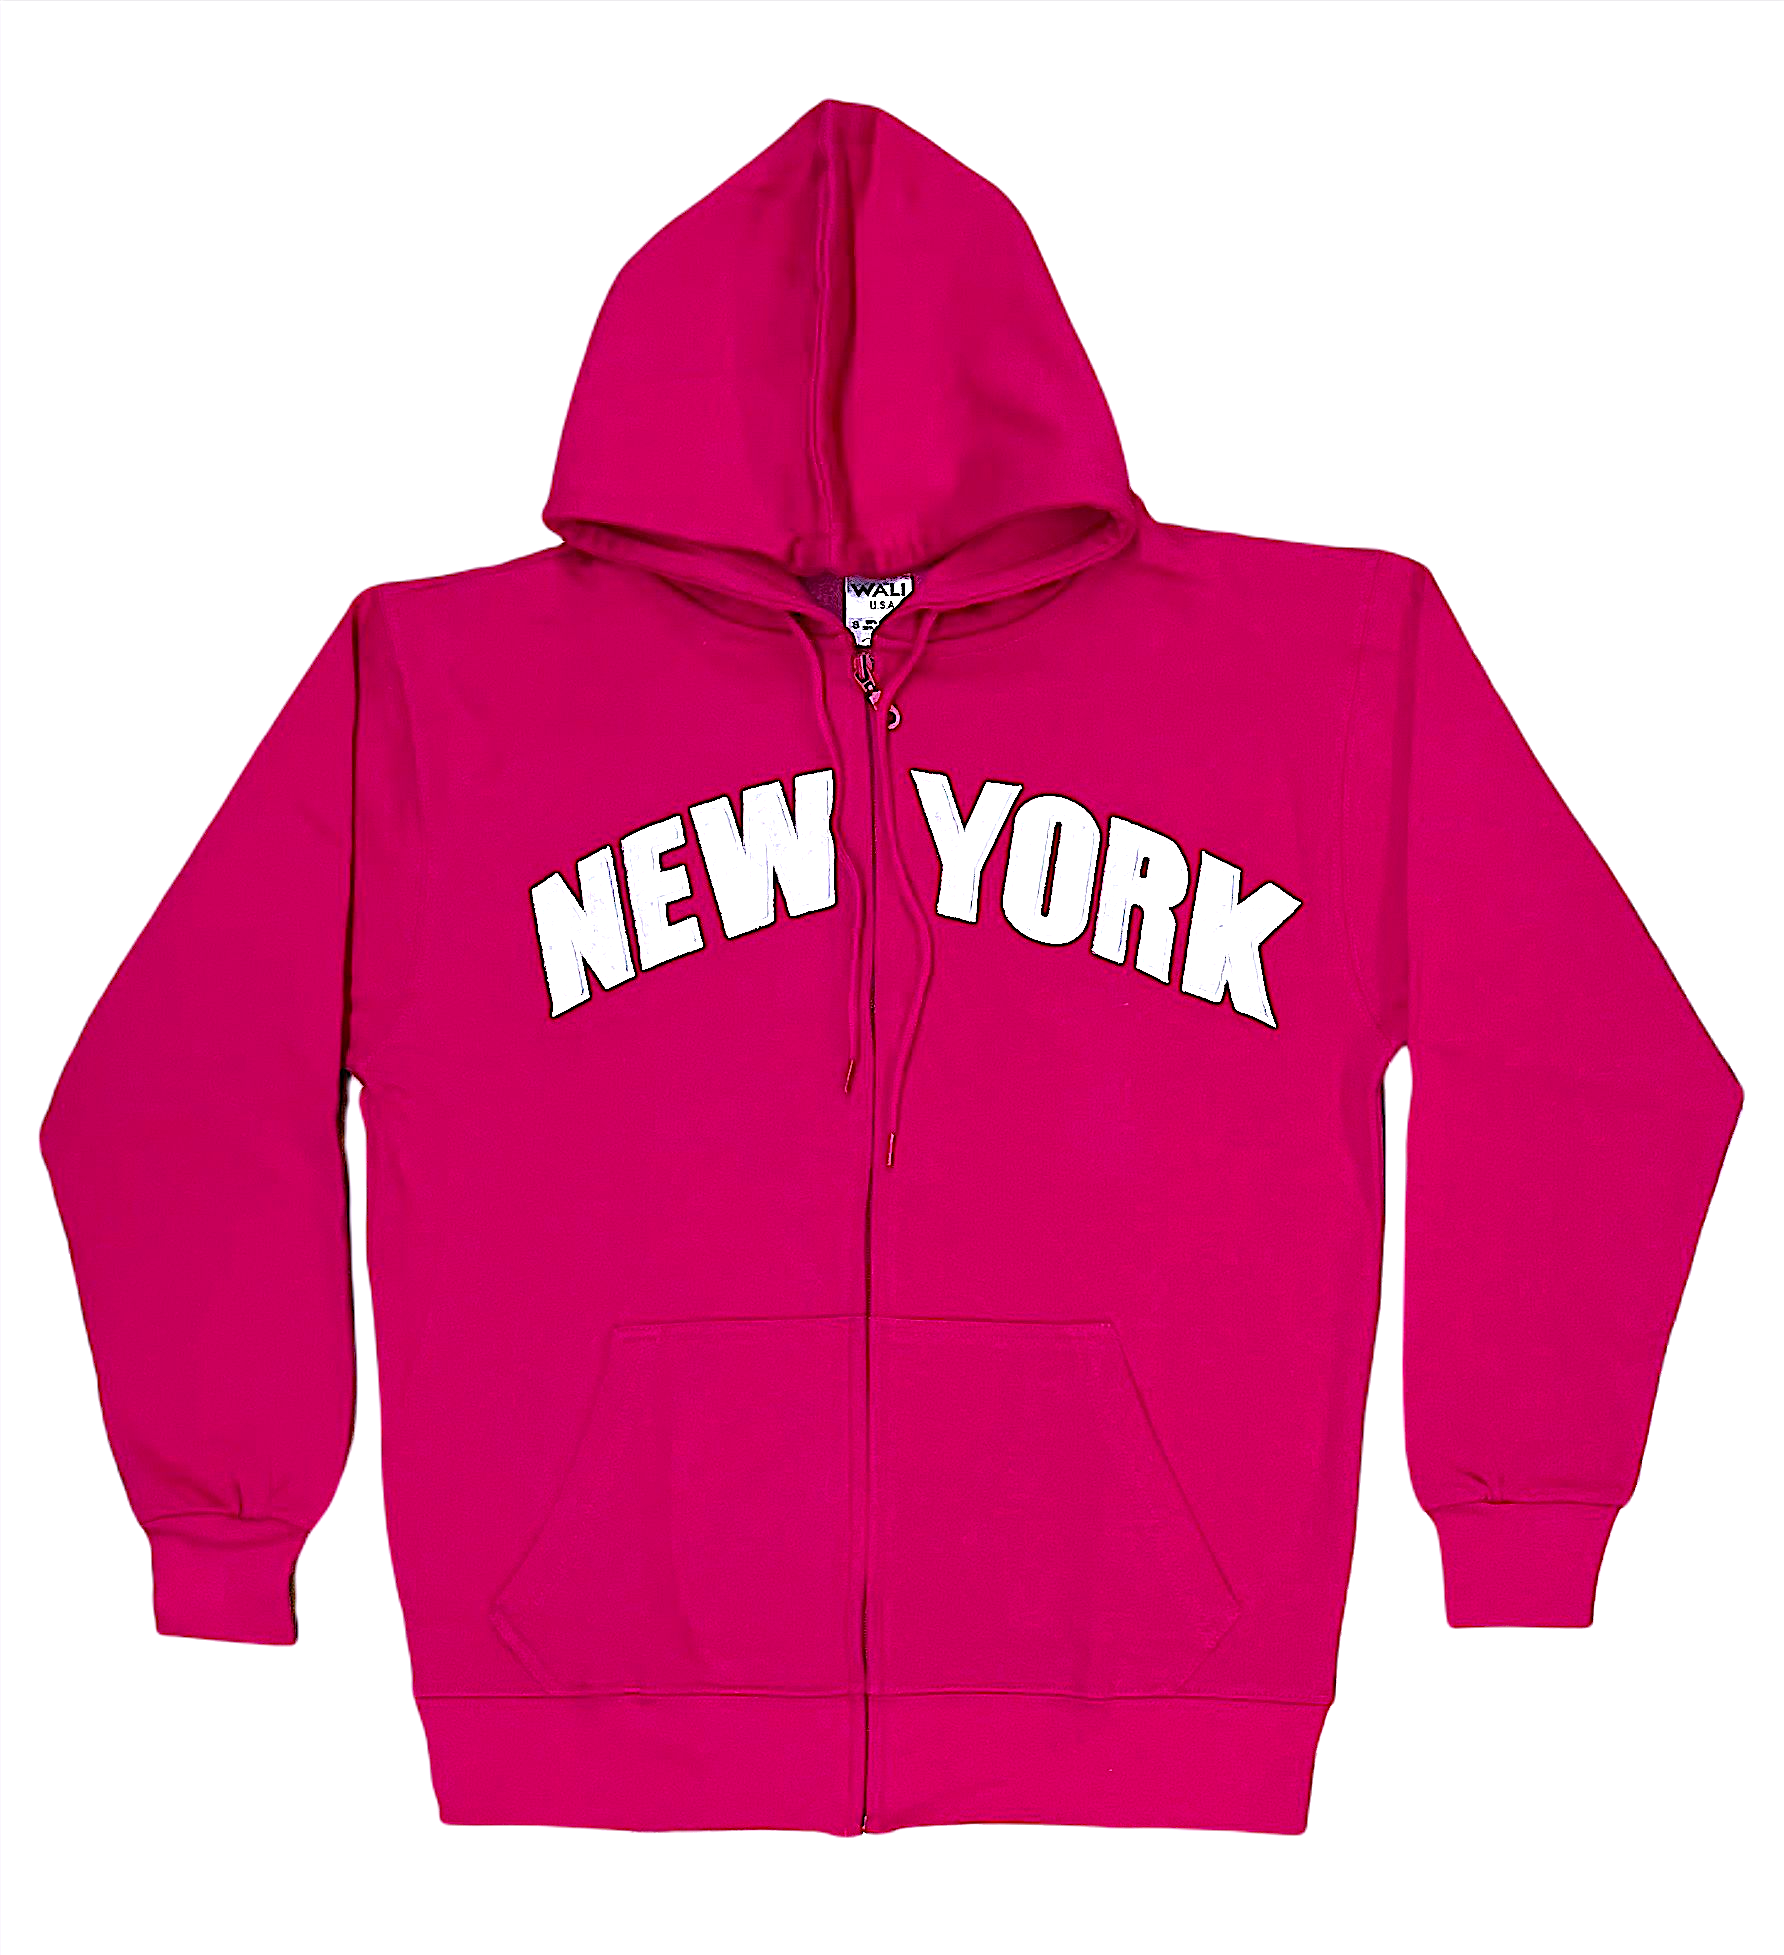 Adult Zipper Hoodies Embroidered with NEW YORK